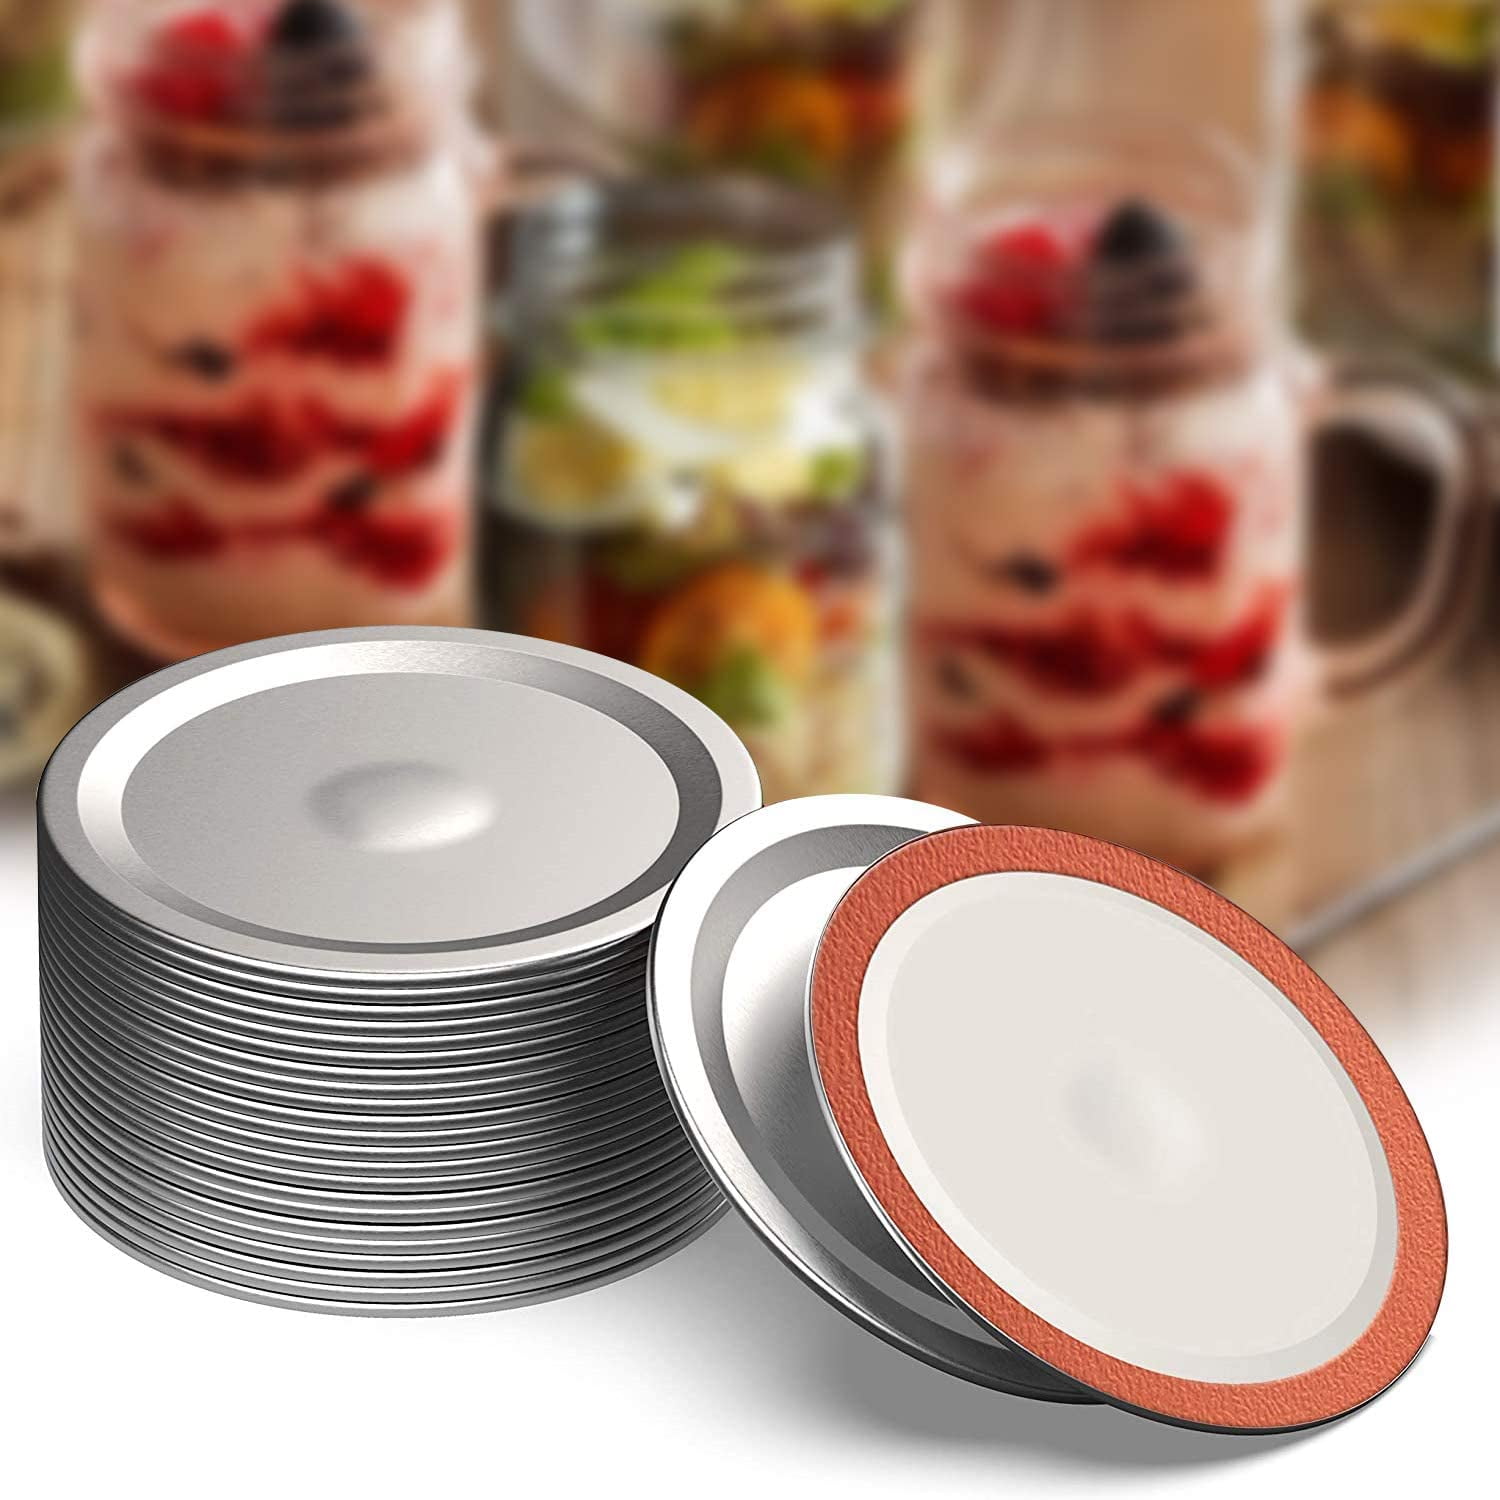 Split-Type Lids Leak Proof and Secure Canning Jar Caps 70mm 24 Pieces Canning Lids and Rings Regular Mouth Mason Jar Lids for Mason Jar Wide Mouth 